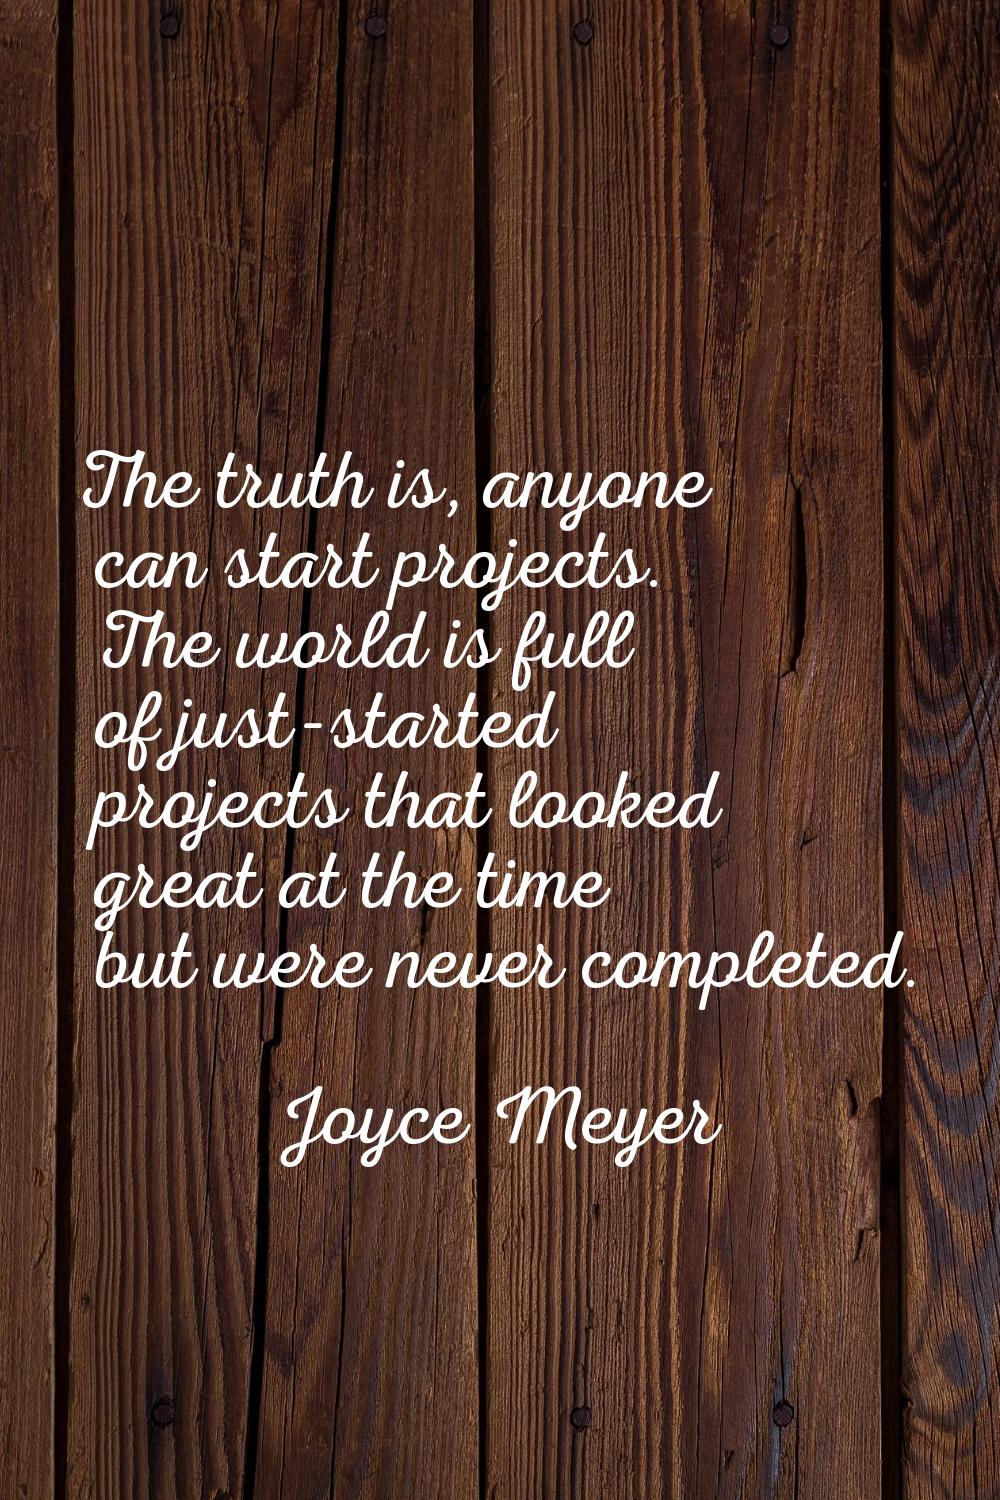 The truth is, anyone can start projects. The world is full of just-started projects that looked gre